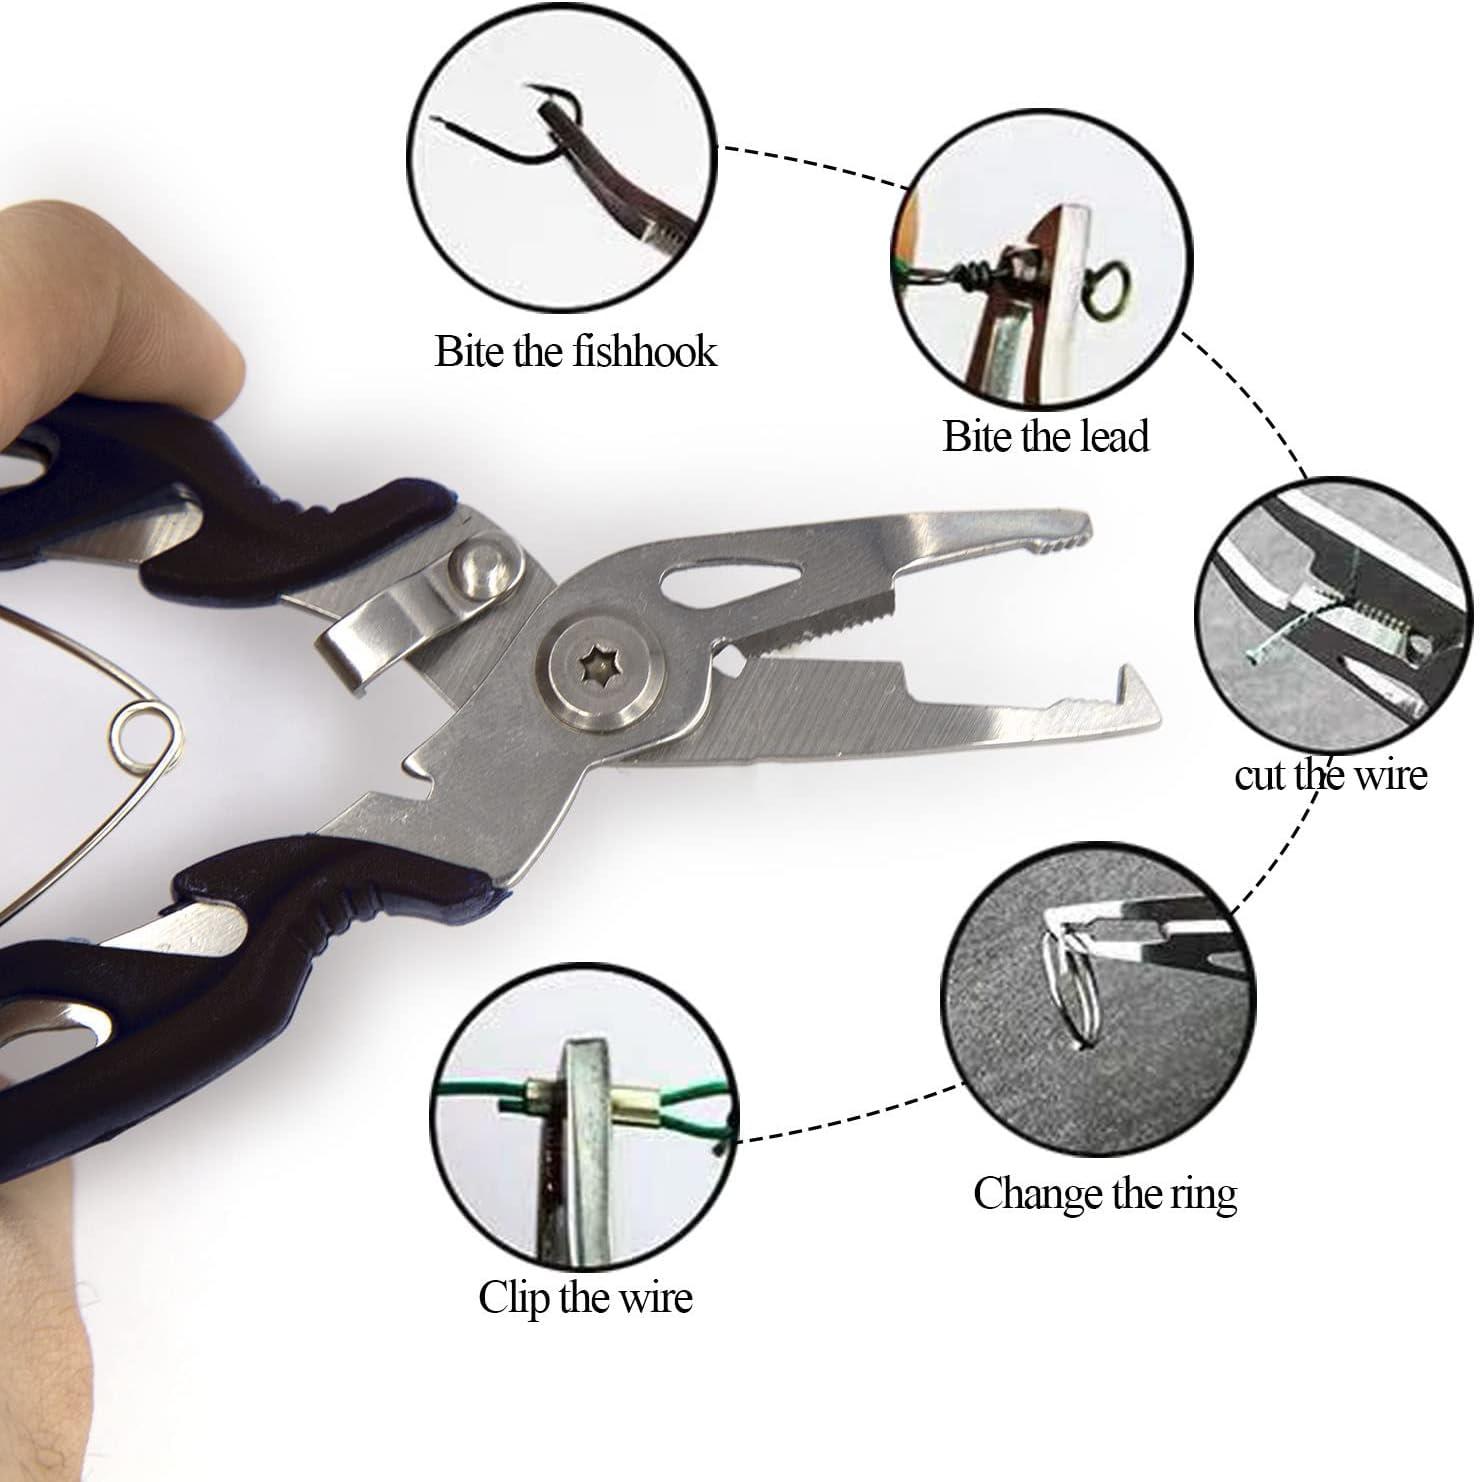 5-Piece Pliers Set Jewelers Kit 5 Stainless Steel Tools Cutting